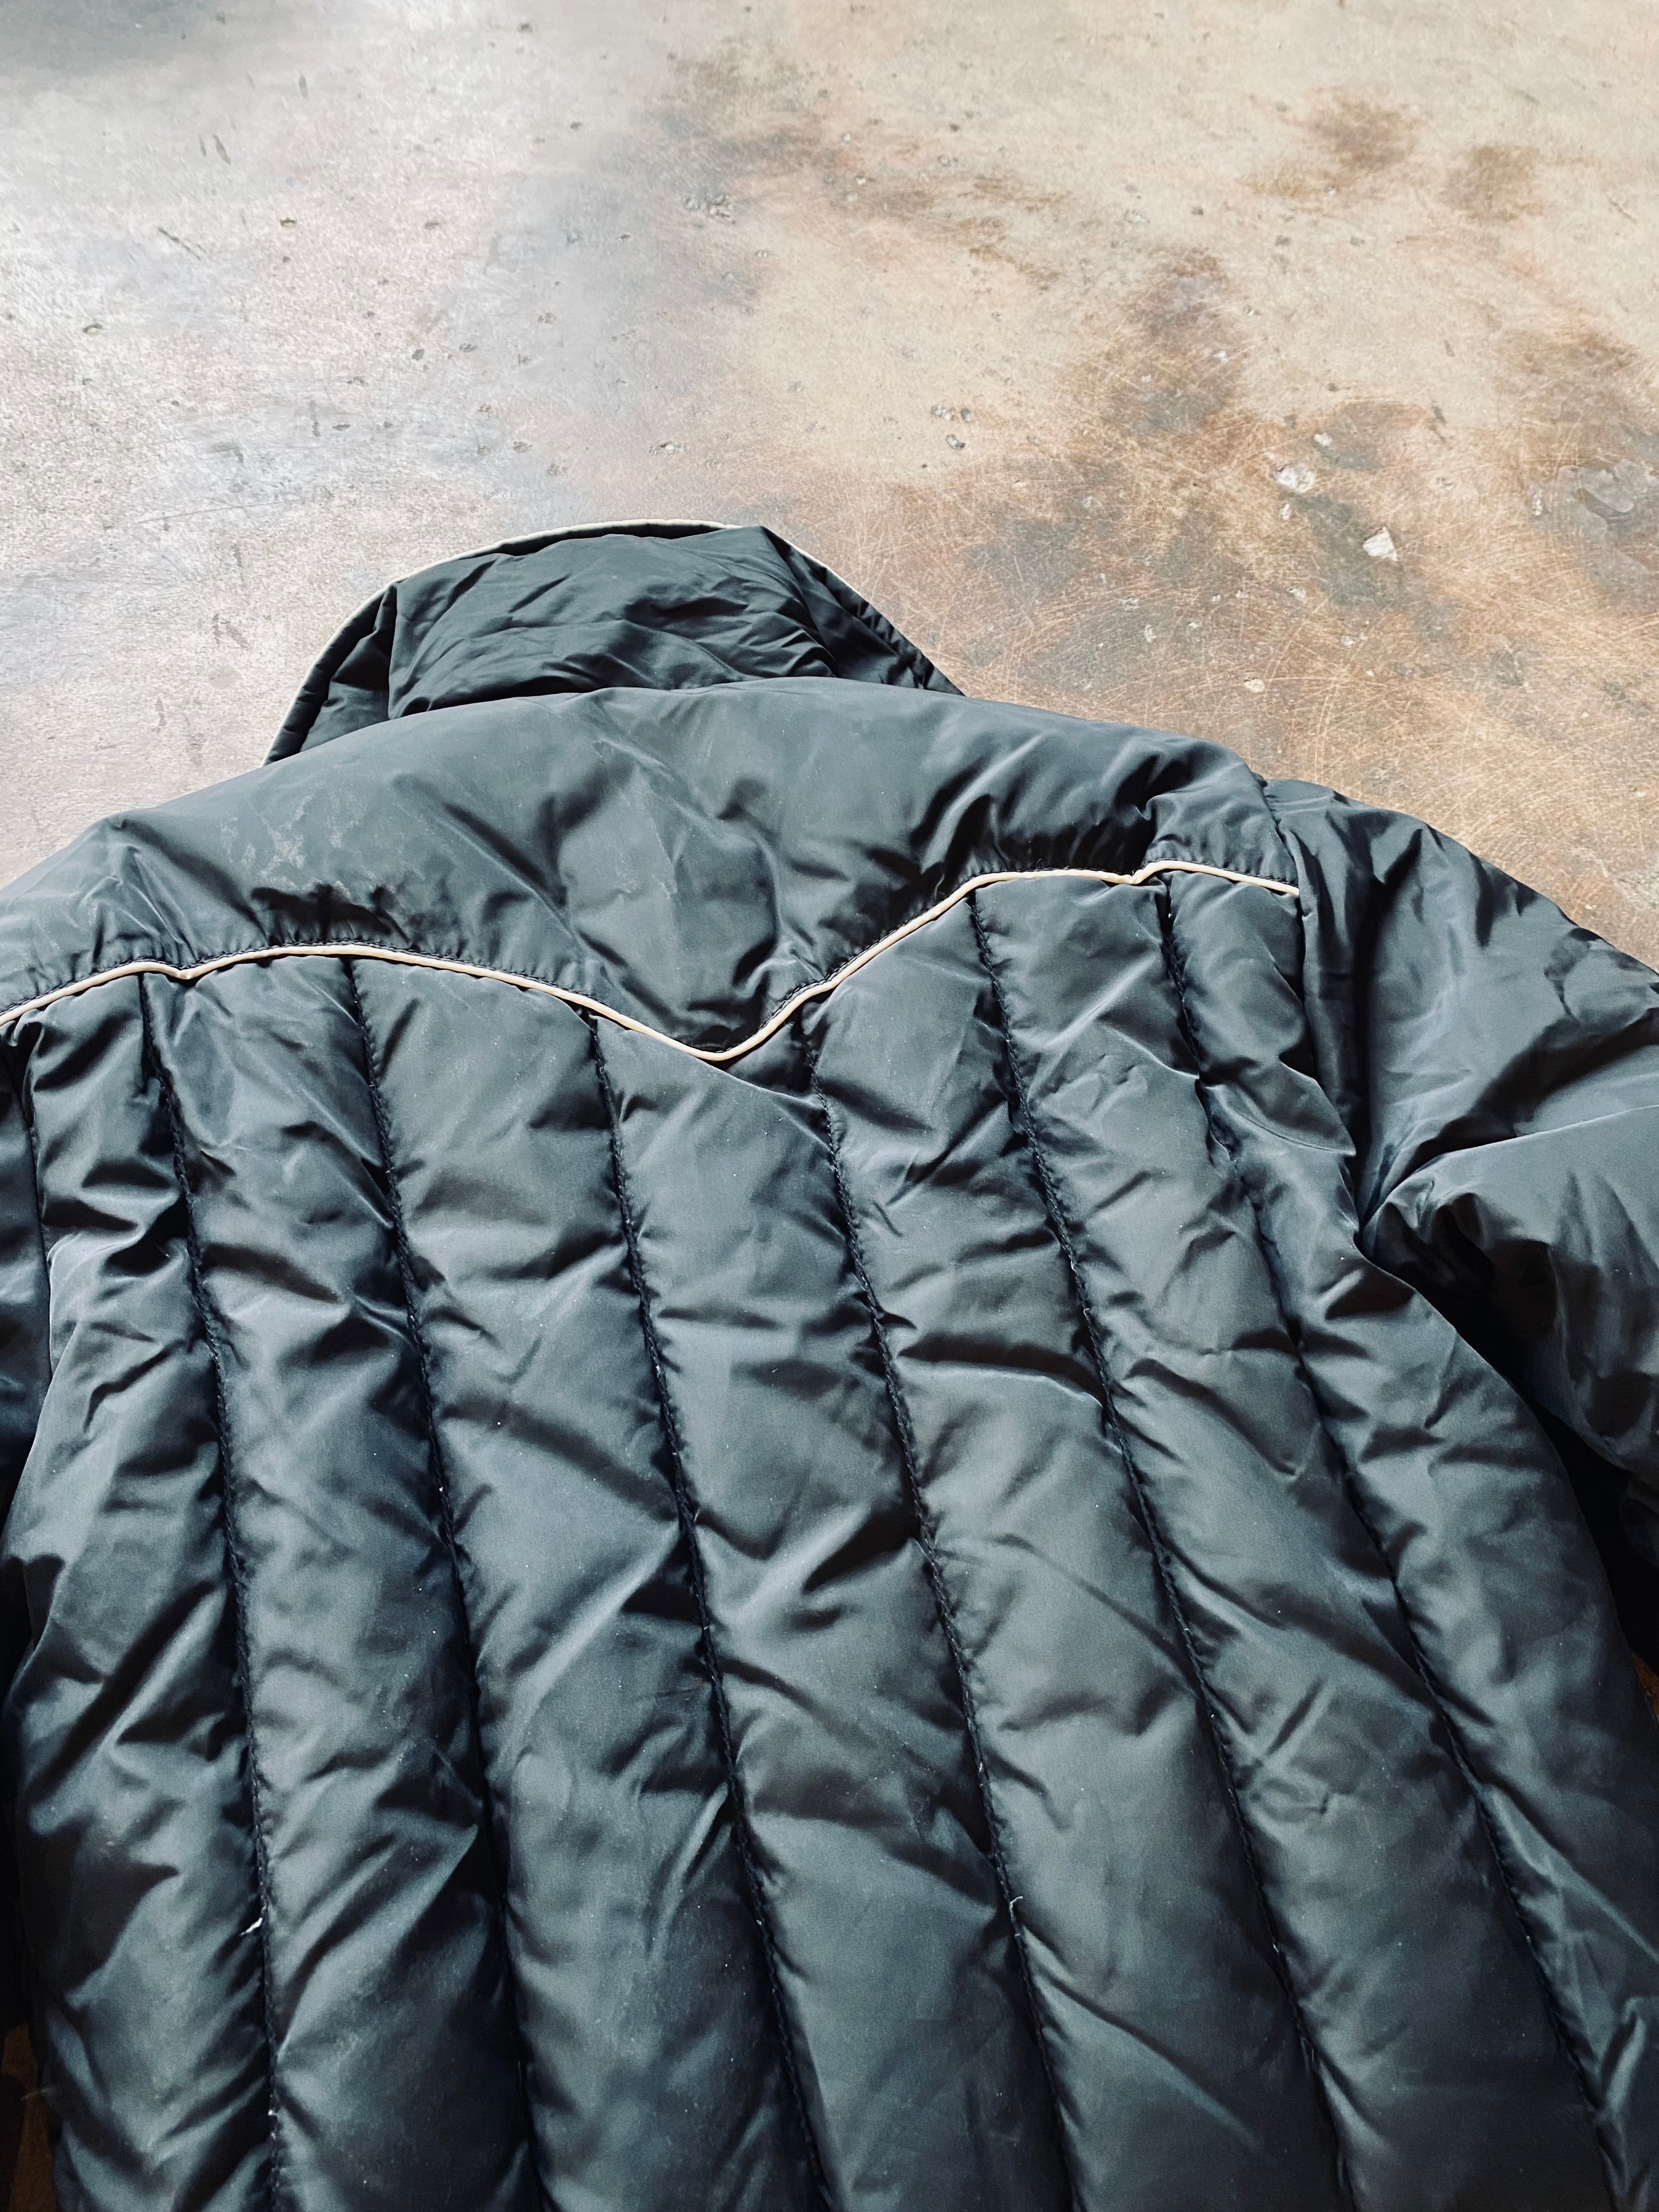 1980s Tempco Puffer Jacket | 10